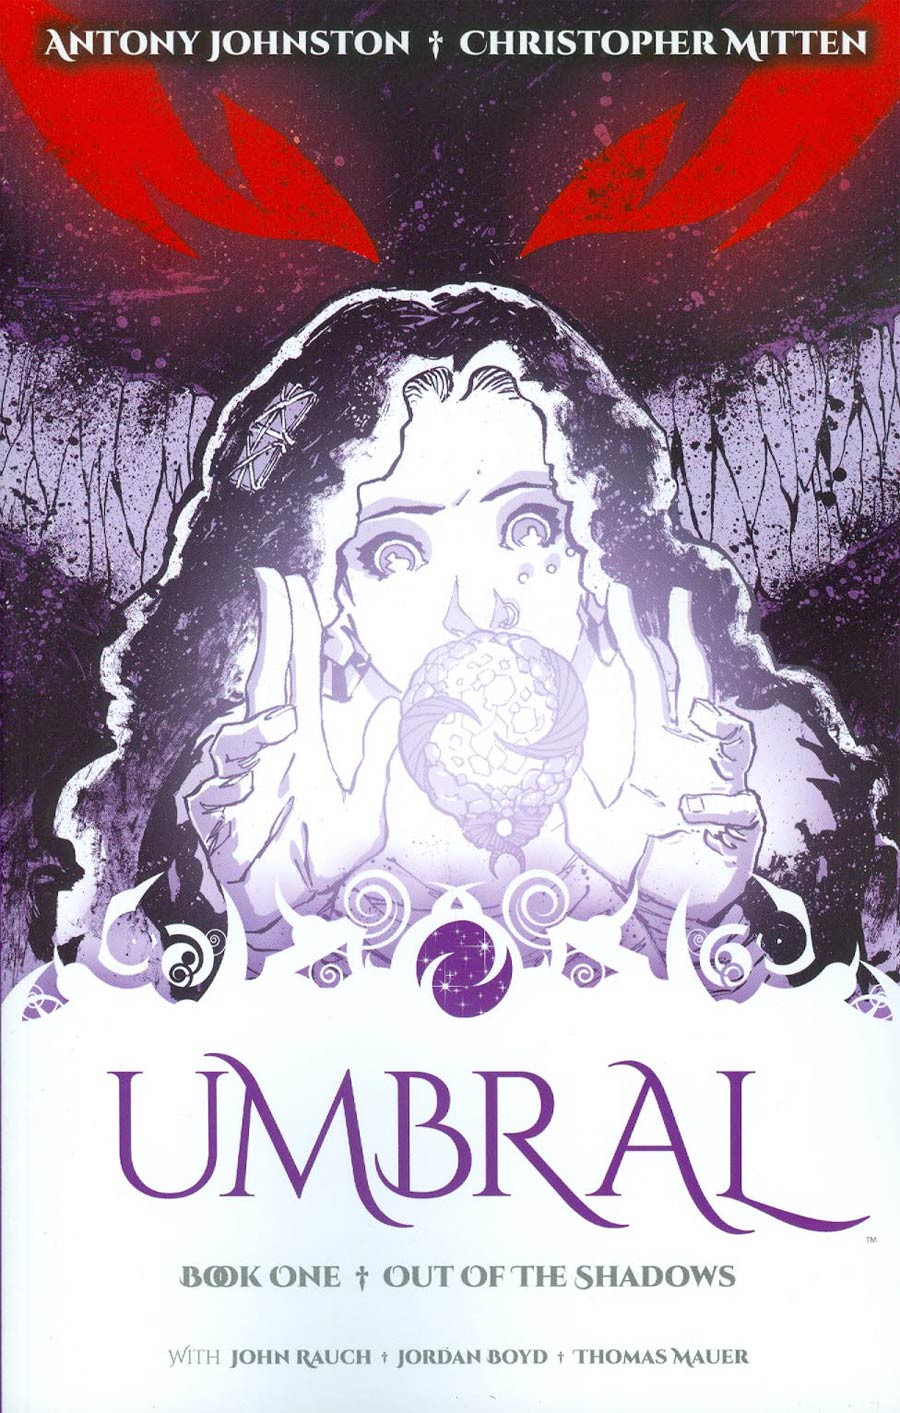 Umbral Vol 1 Out Of The Shadows TP